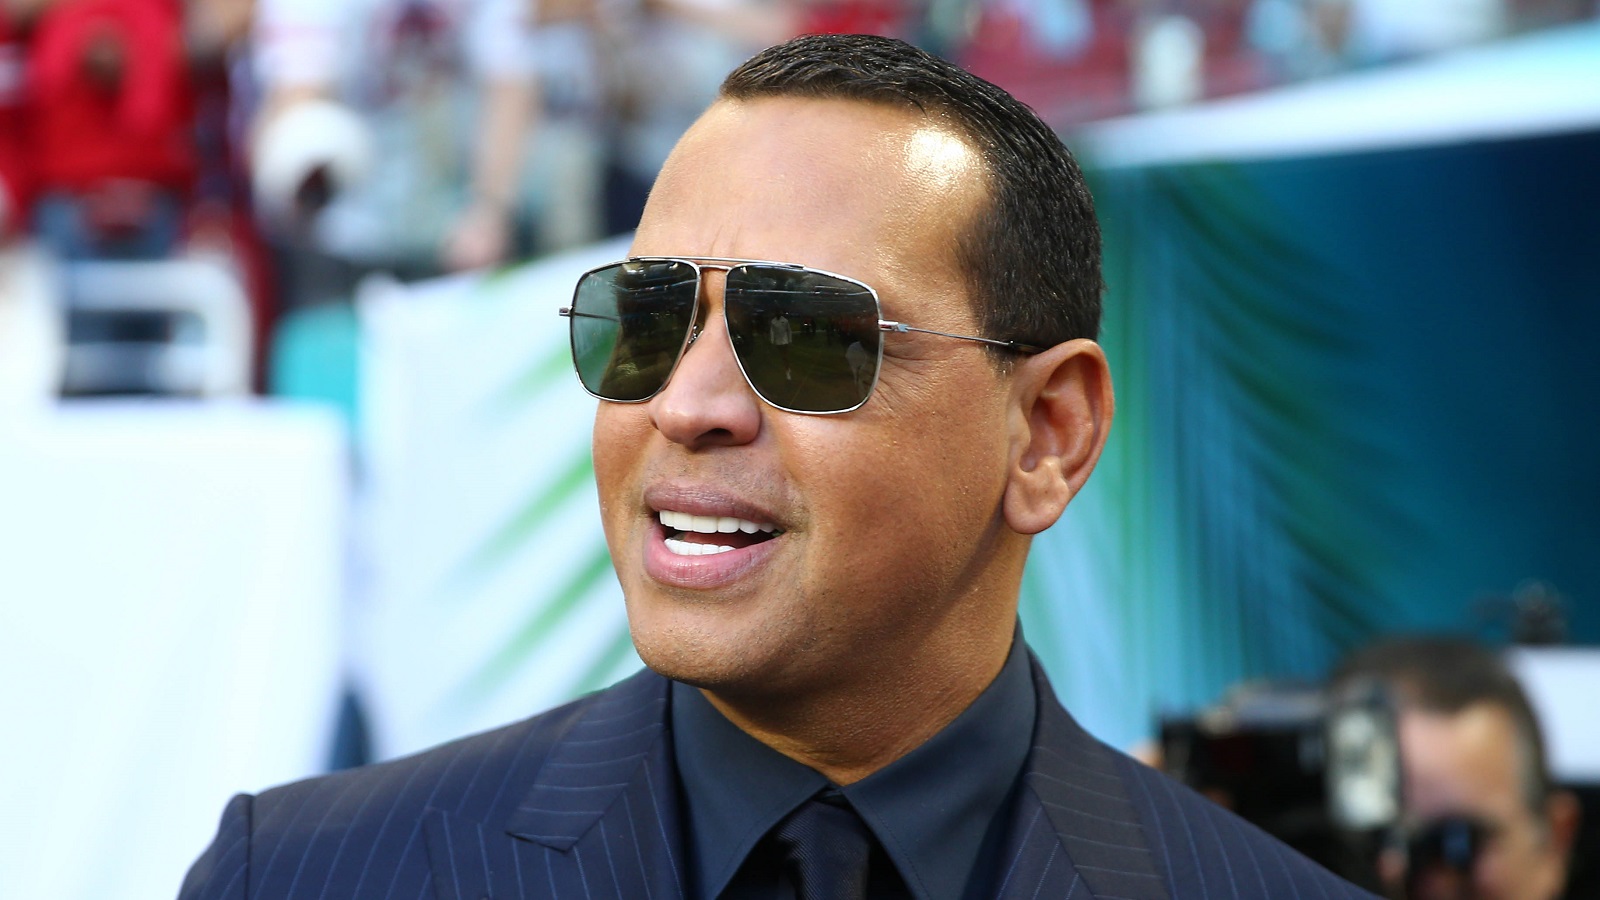 Alex Rodriguez ratted out 3 other players during Biogenesis probe